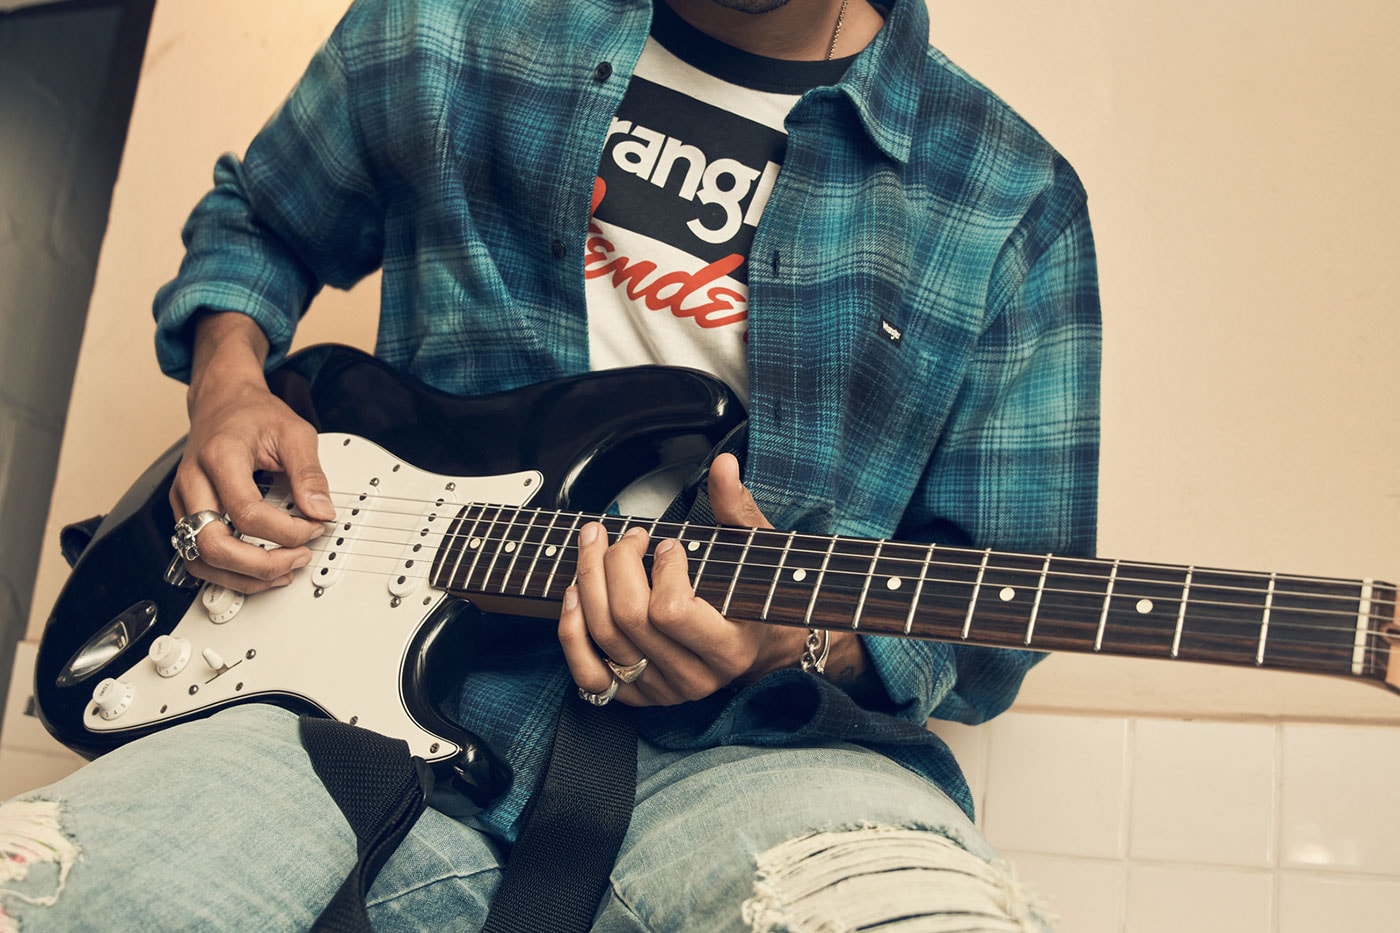 Wrangler Fender collab collection guitar denim graphic t shirt jacket release info date price 